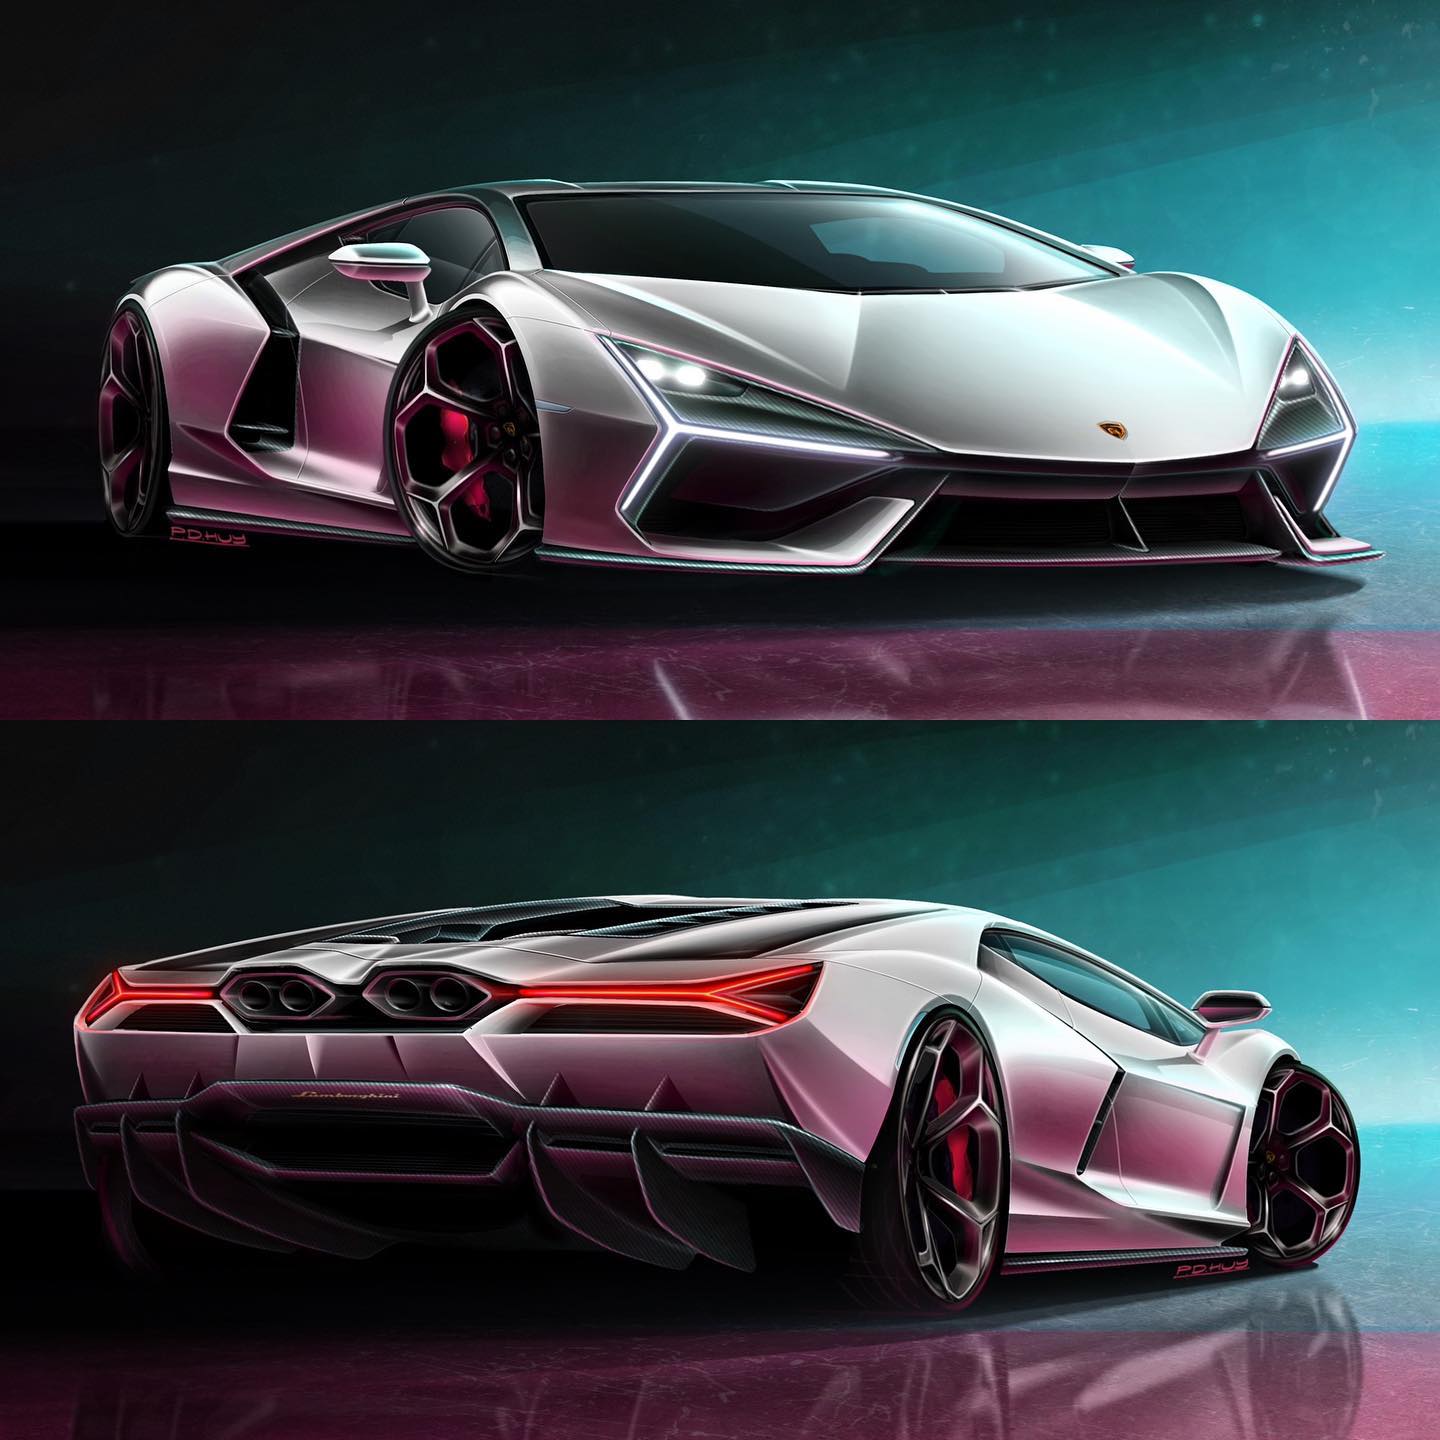 2024 Lambo Aventador Ideation Sketches Follow Leaked Drawings, Look ...